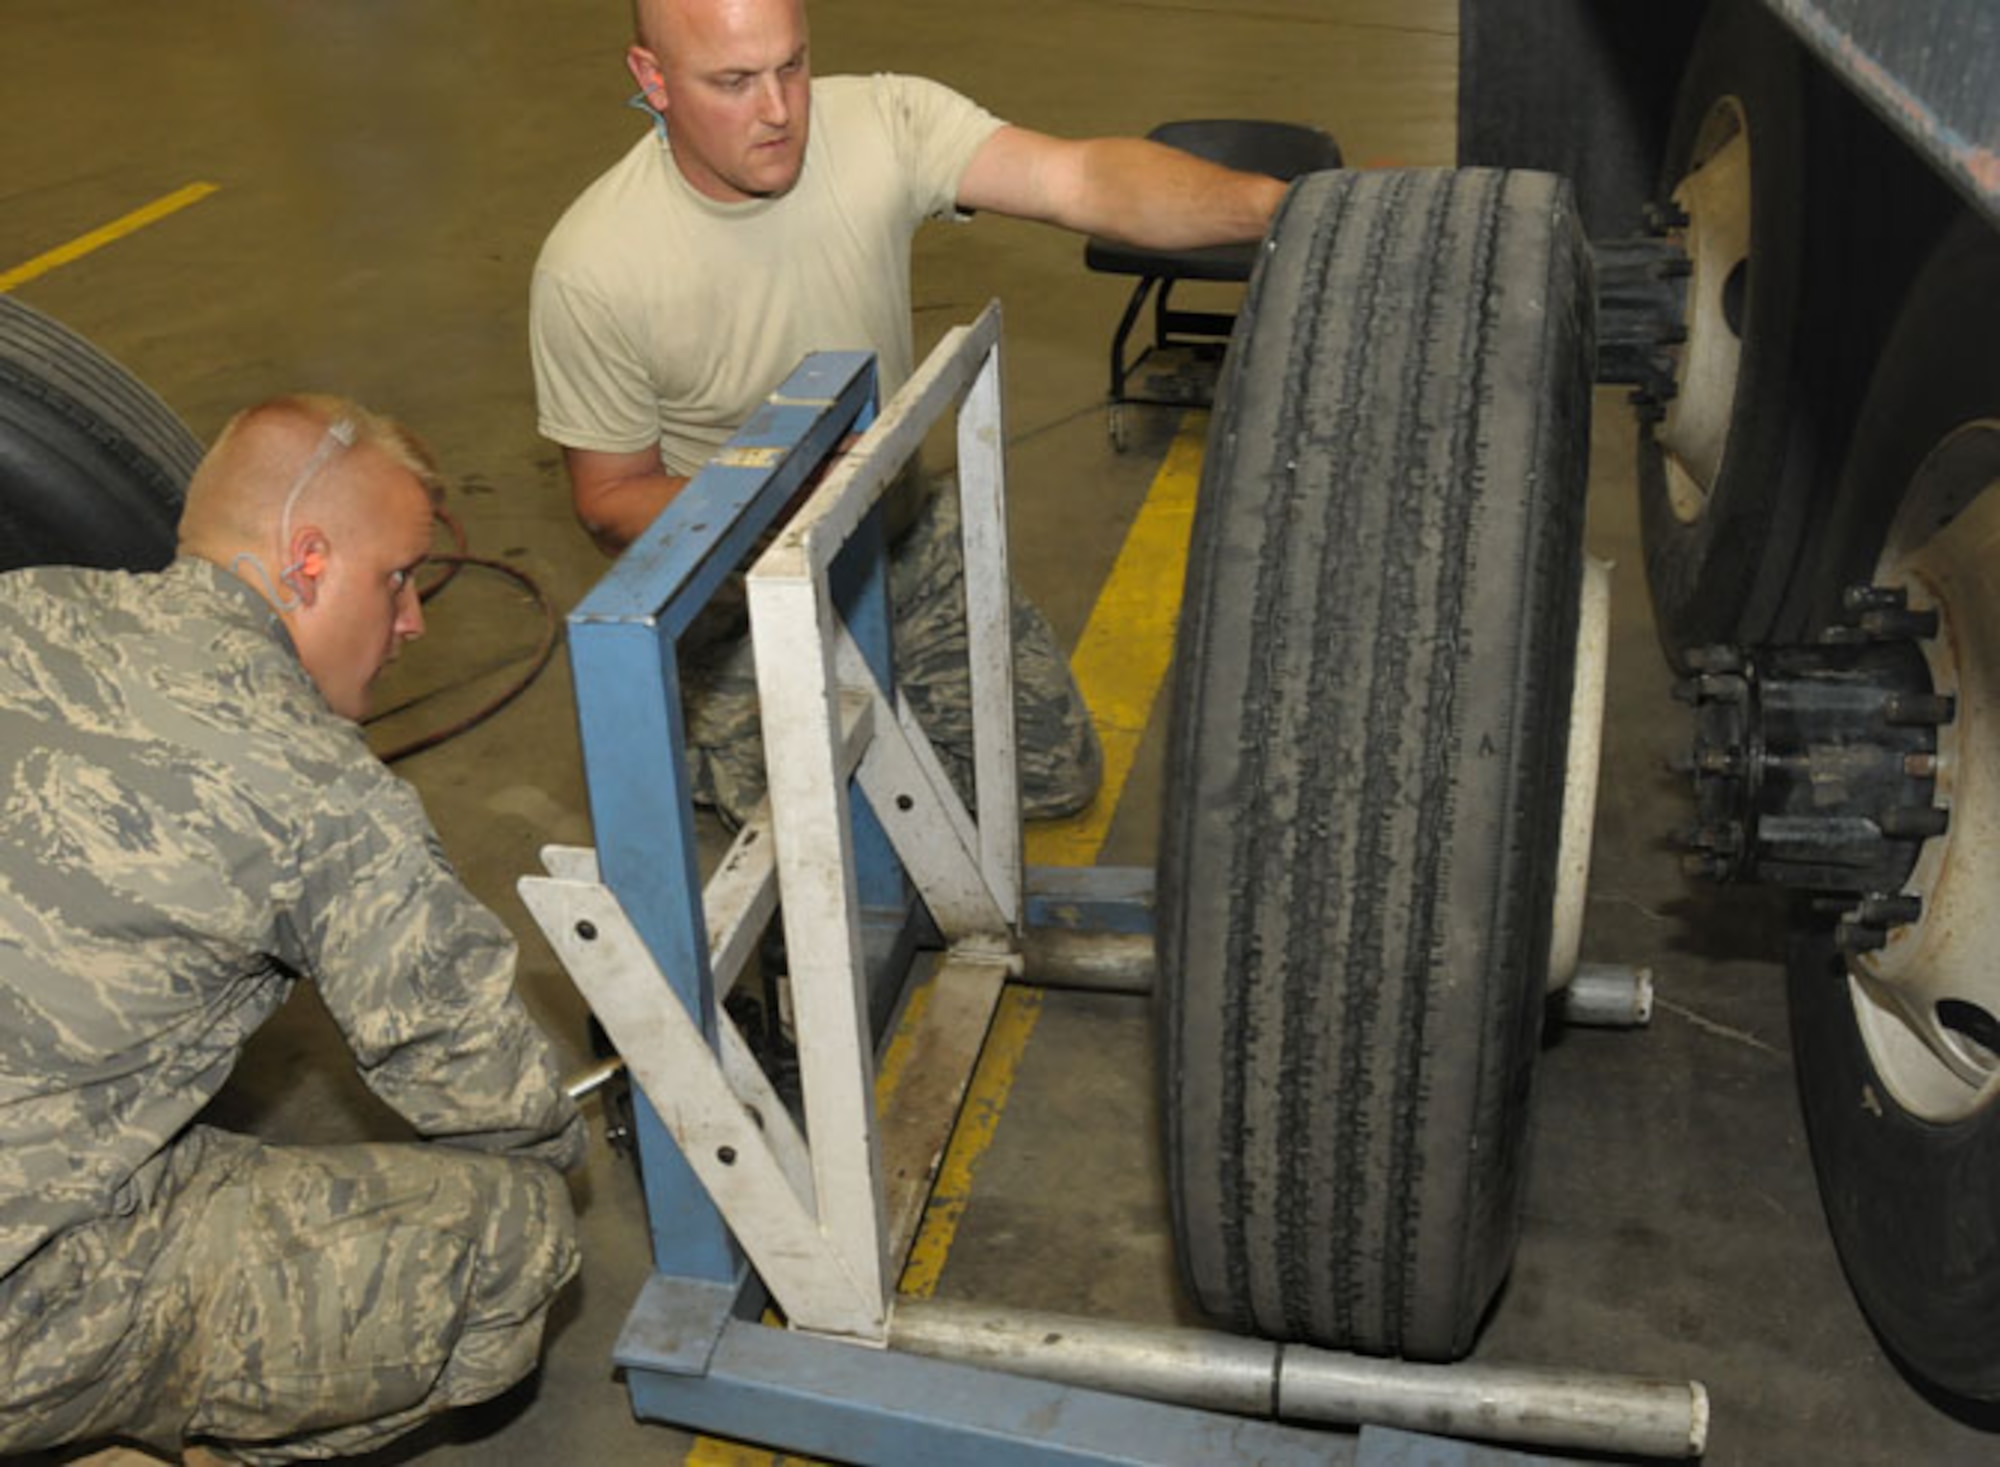 Senior Airman Tobias Burrier (left) and Staff Sergeant Jeffrey Strong (right) from Vehicle Maintenance, Logistics Readiness Squadron, 146th Airlift Wing, Channel Islands Air National Guard Station, Calif. maneuver a tire onto a large dump truck during a deployment to Joint Base Elmendorf Richardson on June 8, 2011. The 146th AW sent three squadrons to JBER from June 4 to June 18, 2011. The Air Terminal Operations Squadron, Logistics Readiness Squadron, and Security Forces Squadron moved down range to complete their respective annual training requirements. Photo by Tech. Sgt. Alex Koenig
